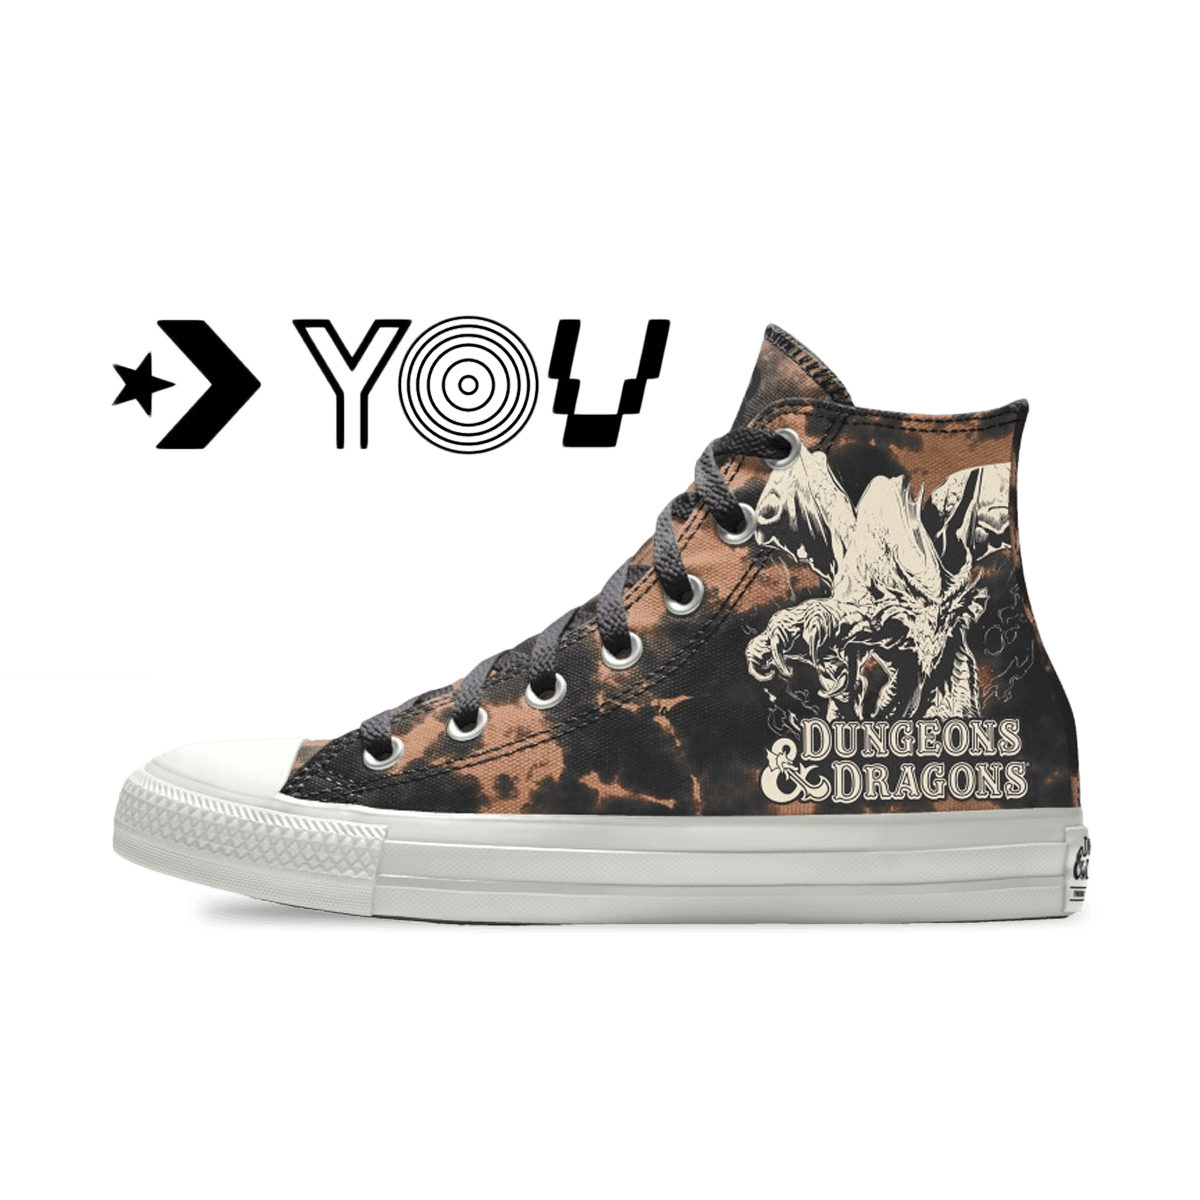 Dungeons & Dragons x Converse Chuck Taylor All Star - By You